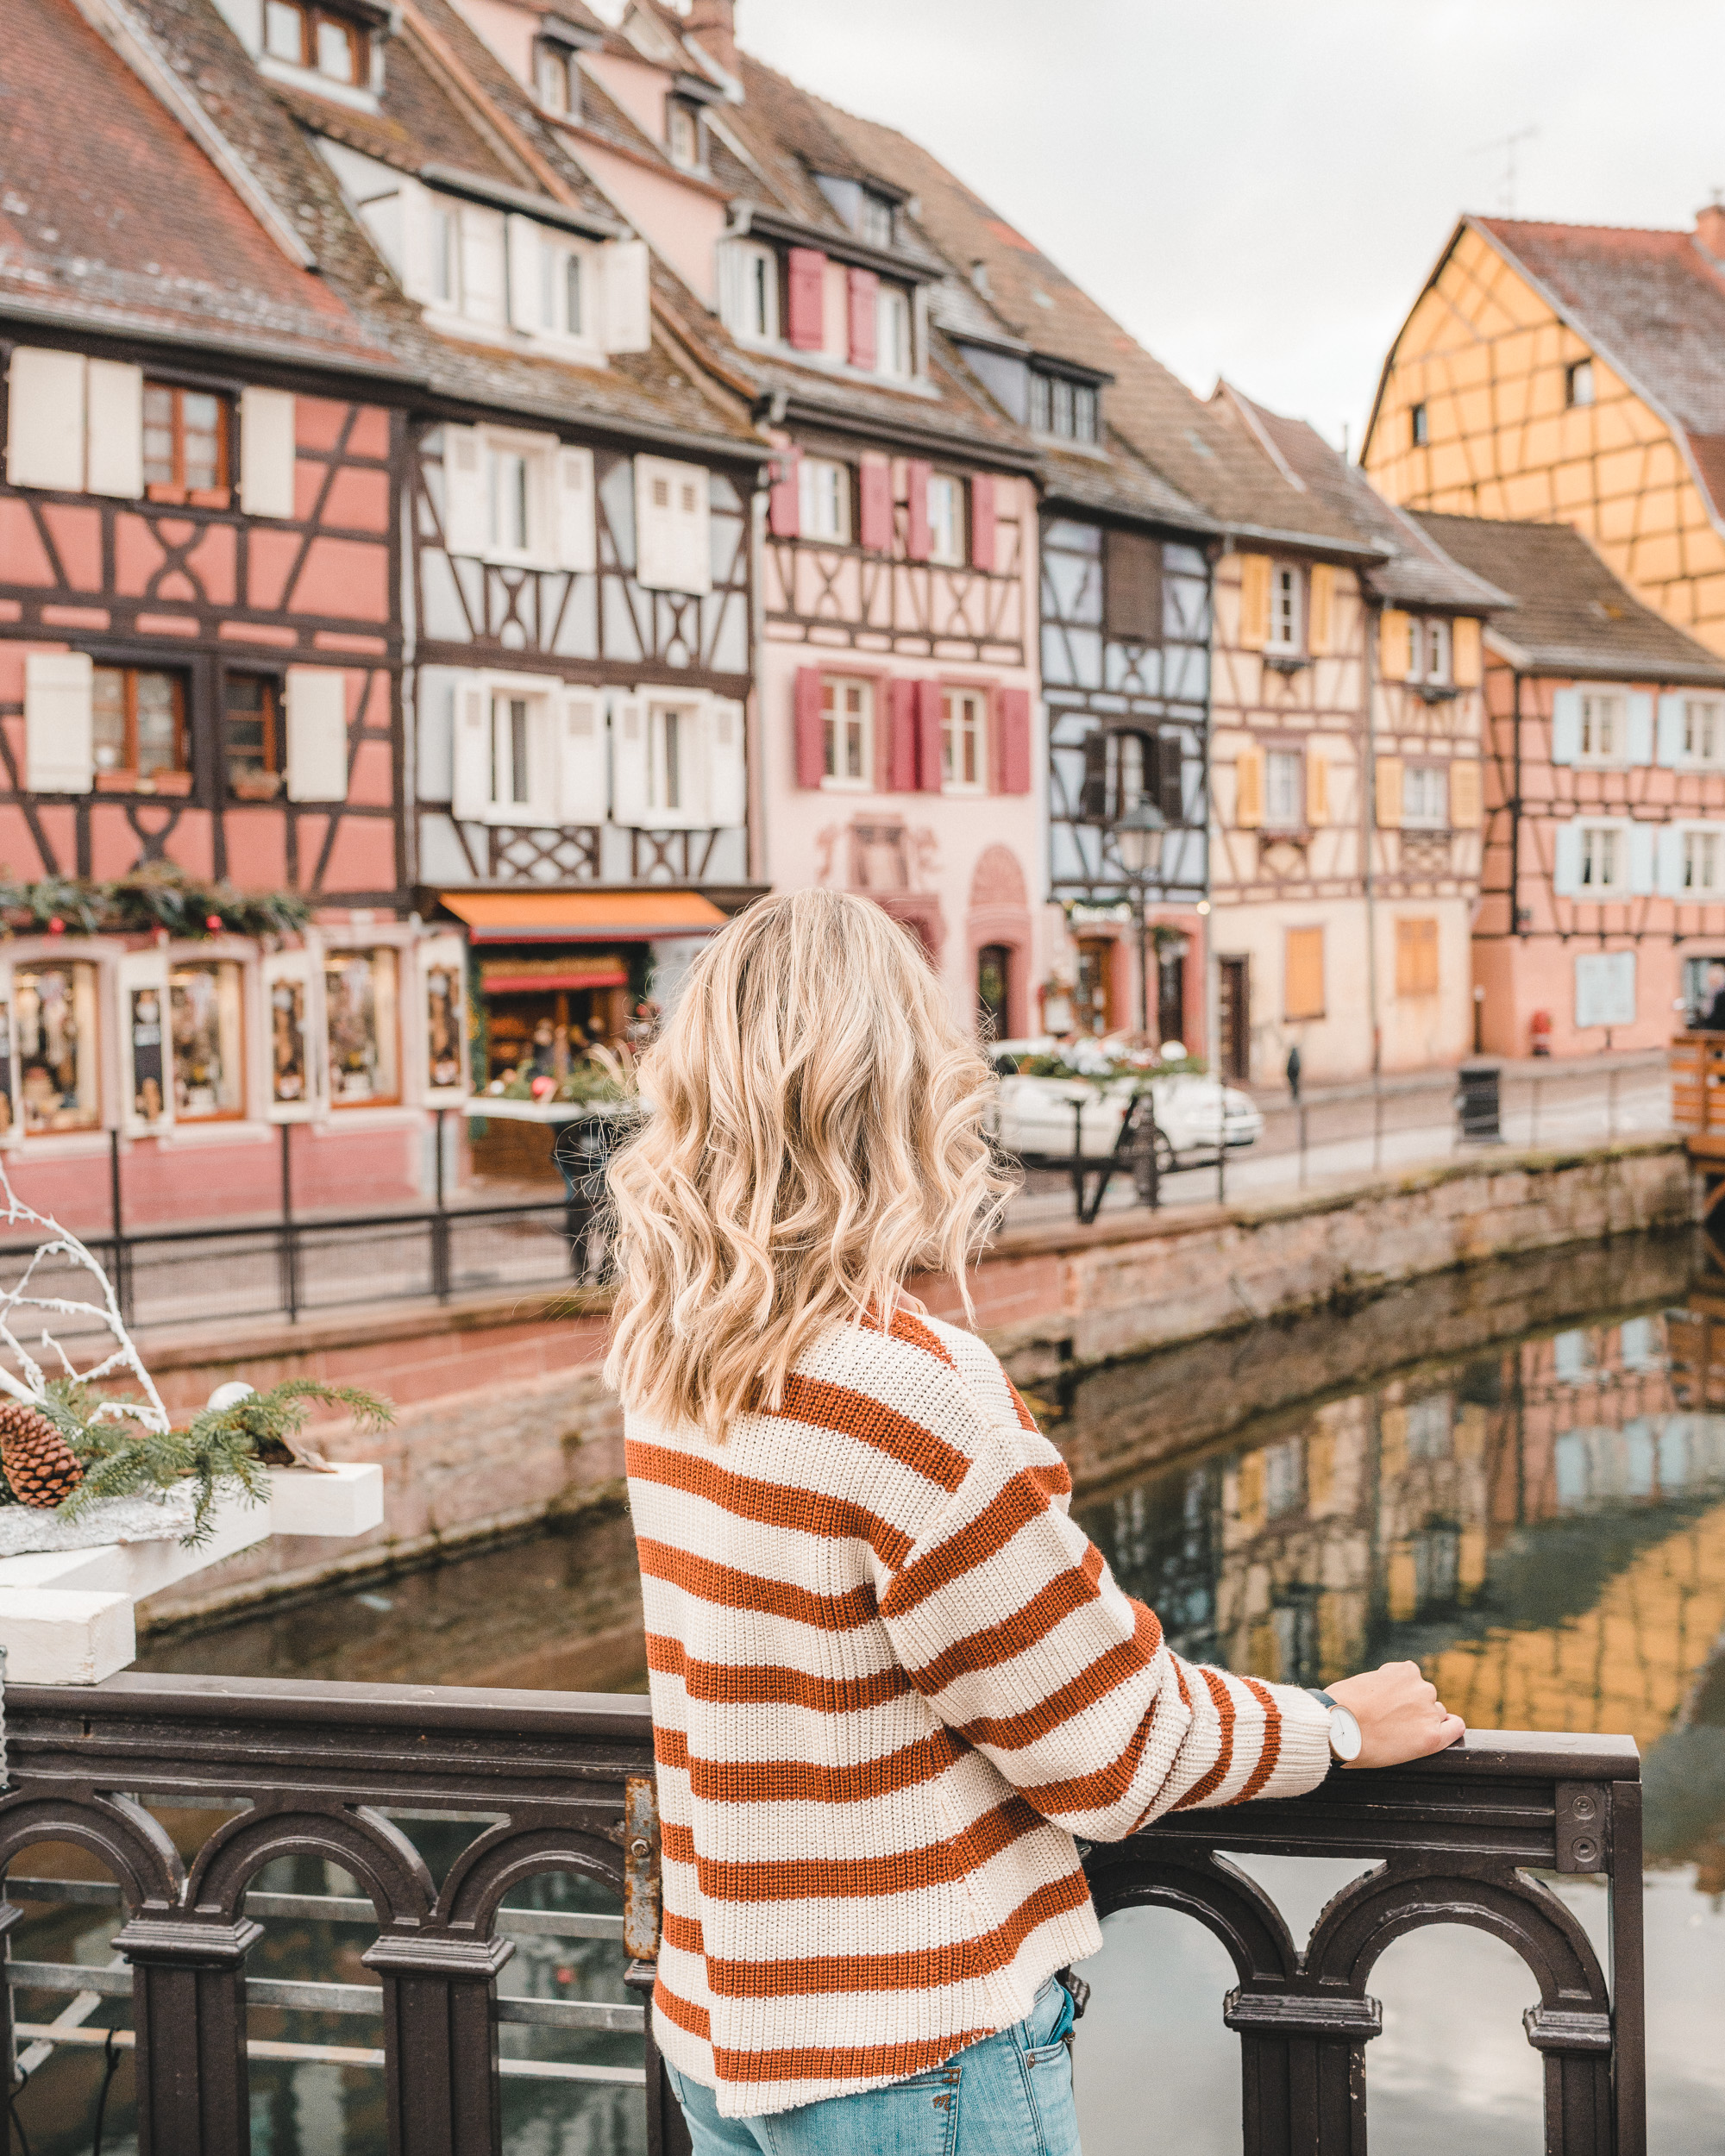 pastel houses on the canals of colmar france alsace 